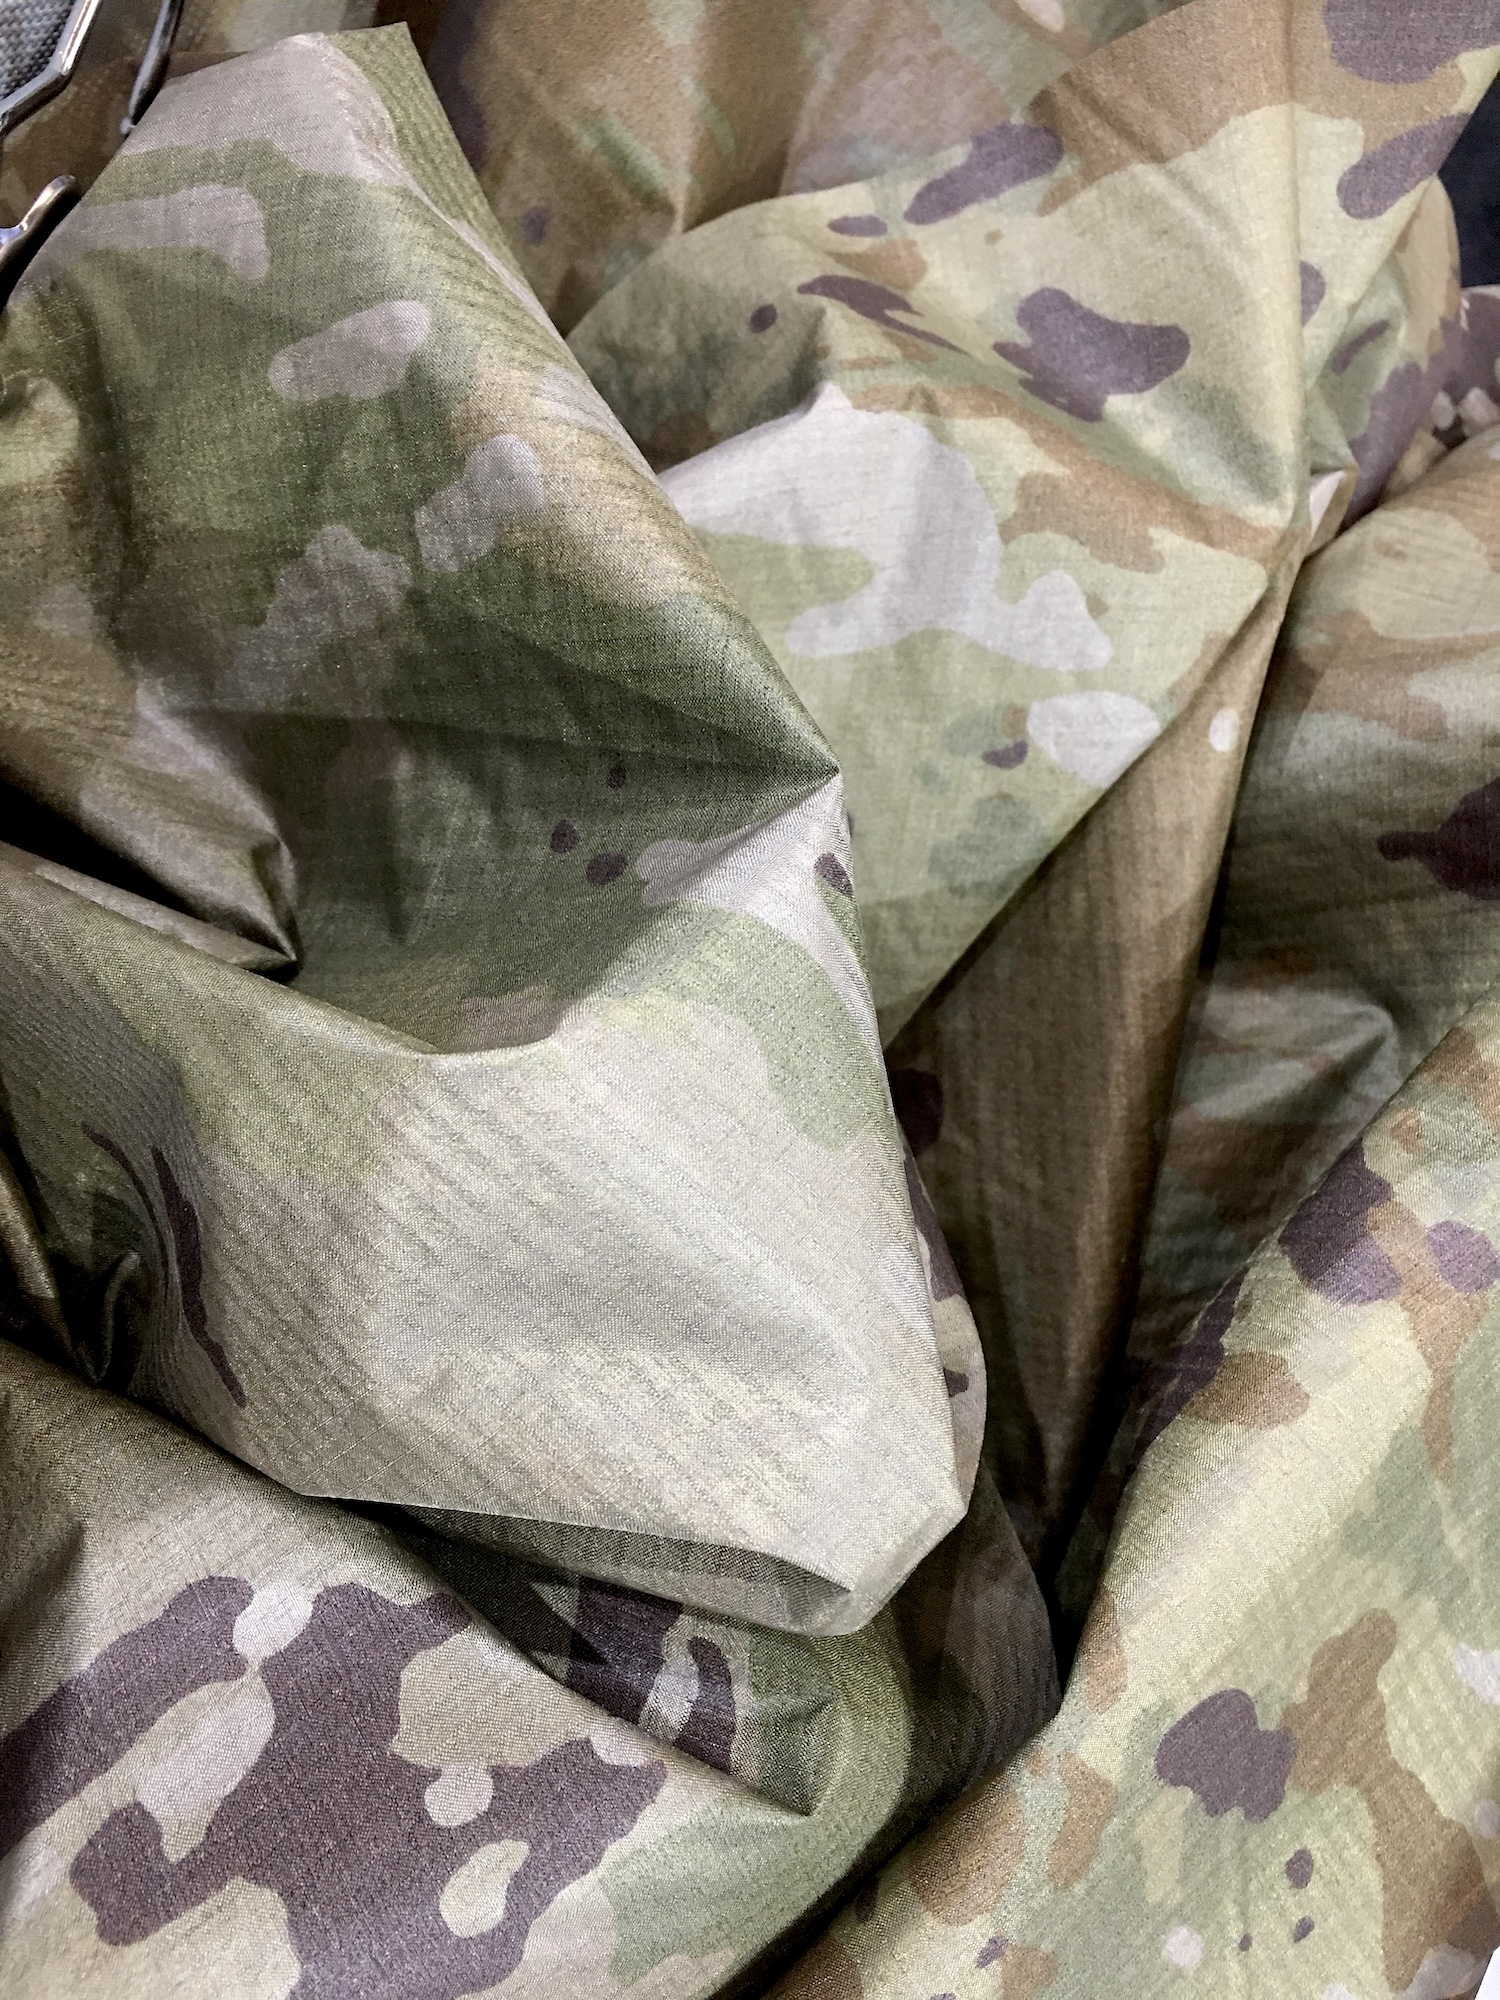 Noble Biomaterials Circuitex Sigma is shown here coating a ripstop nylon that is then over-printed with a camouflage pattern for military use. © Marie O’Mahony